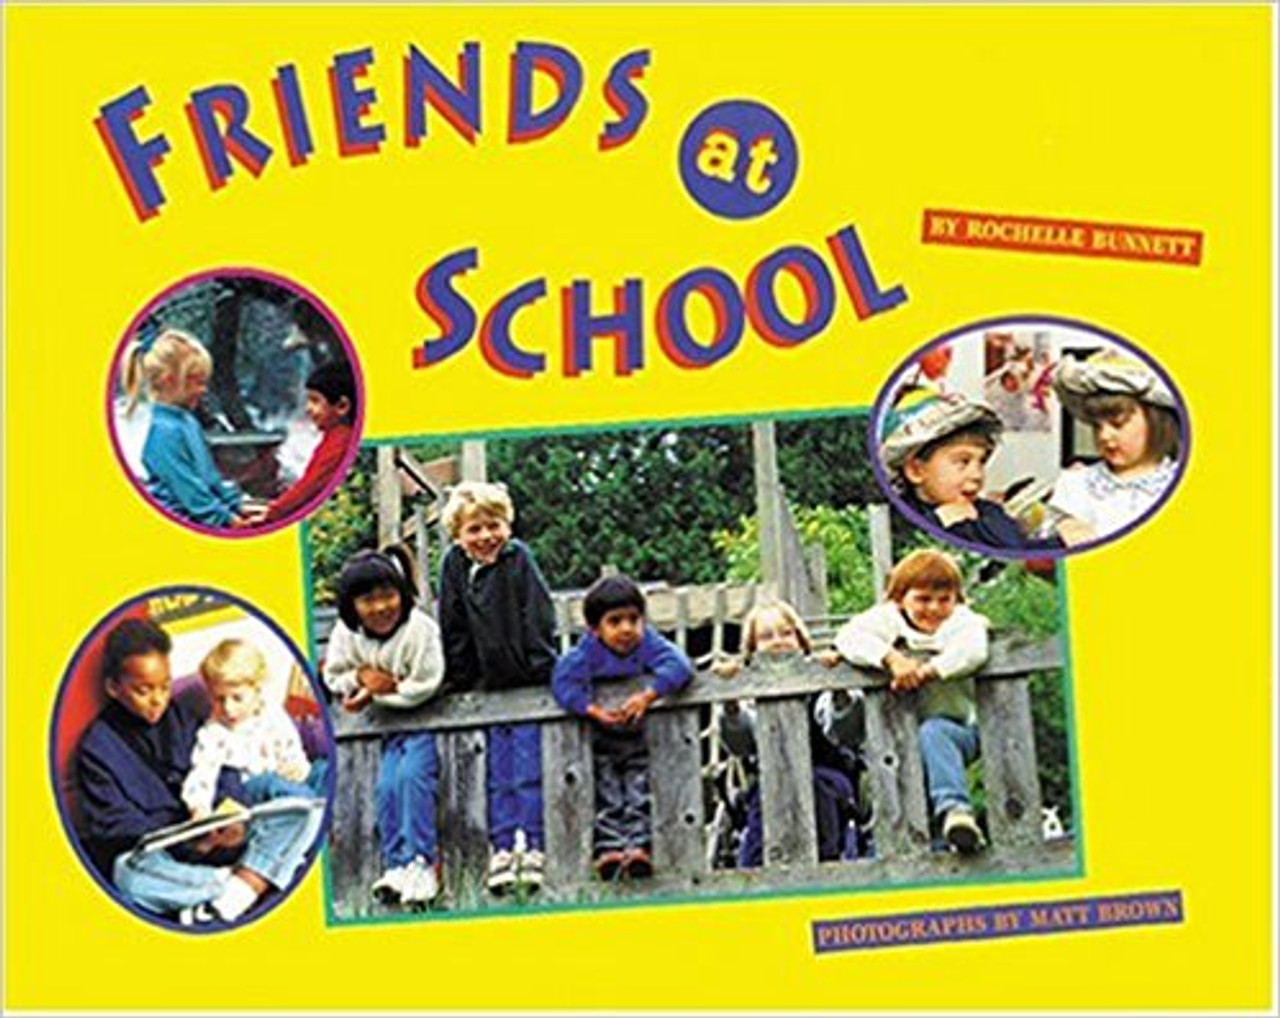 This book conveys the importance and warmth of children with many differences sharing, supporting, loving, and learning from one another.